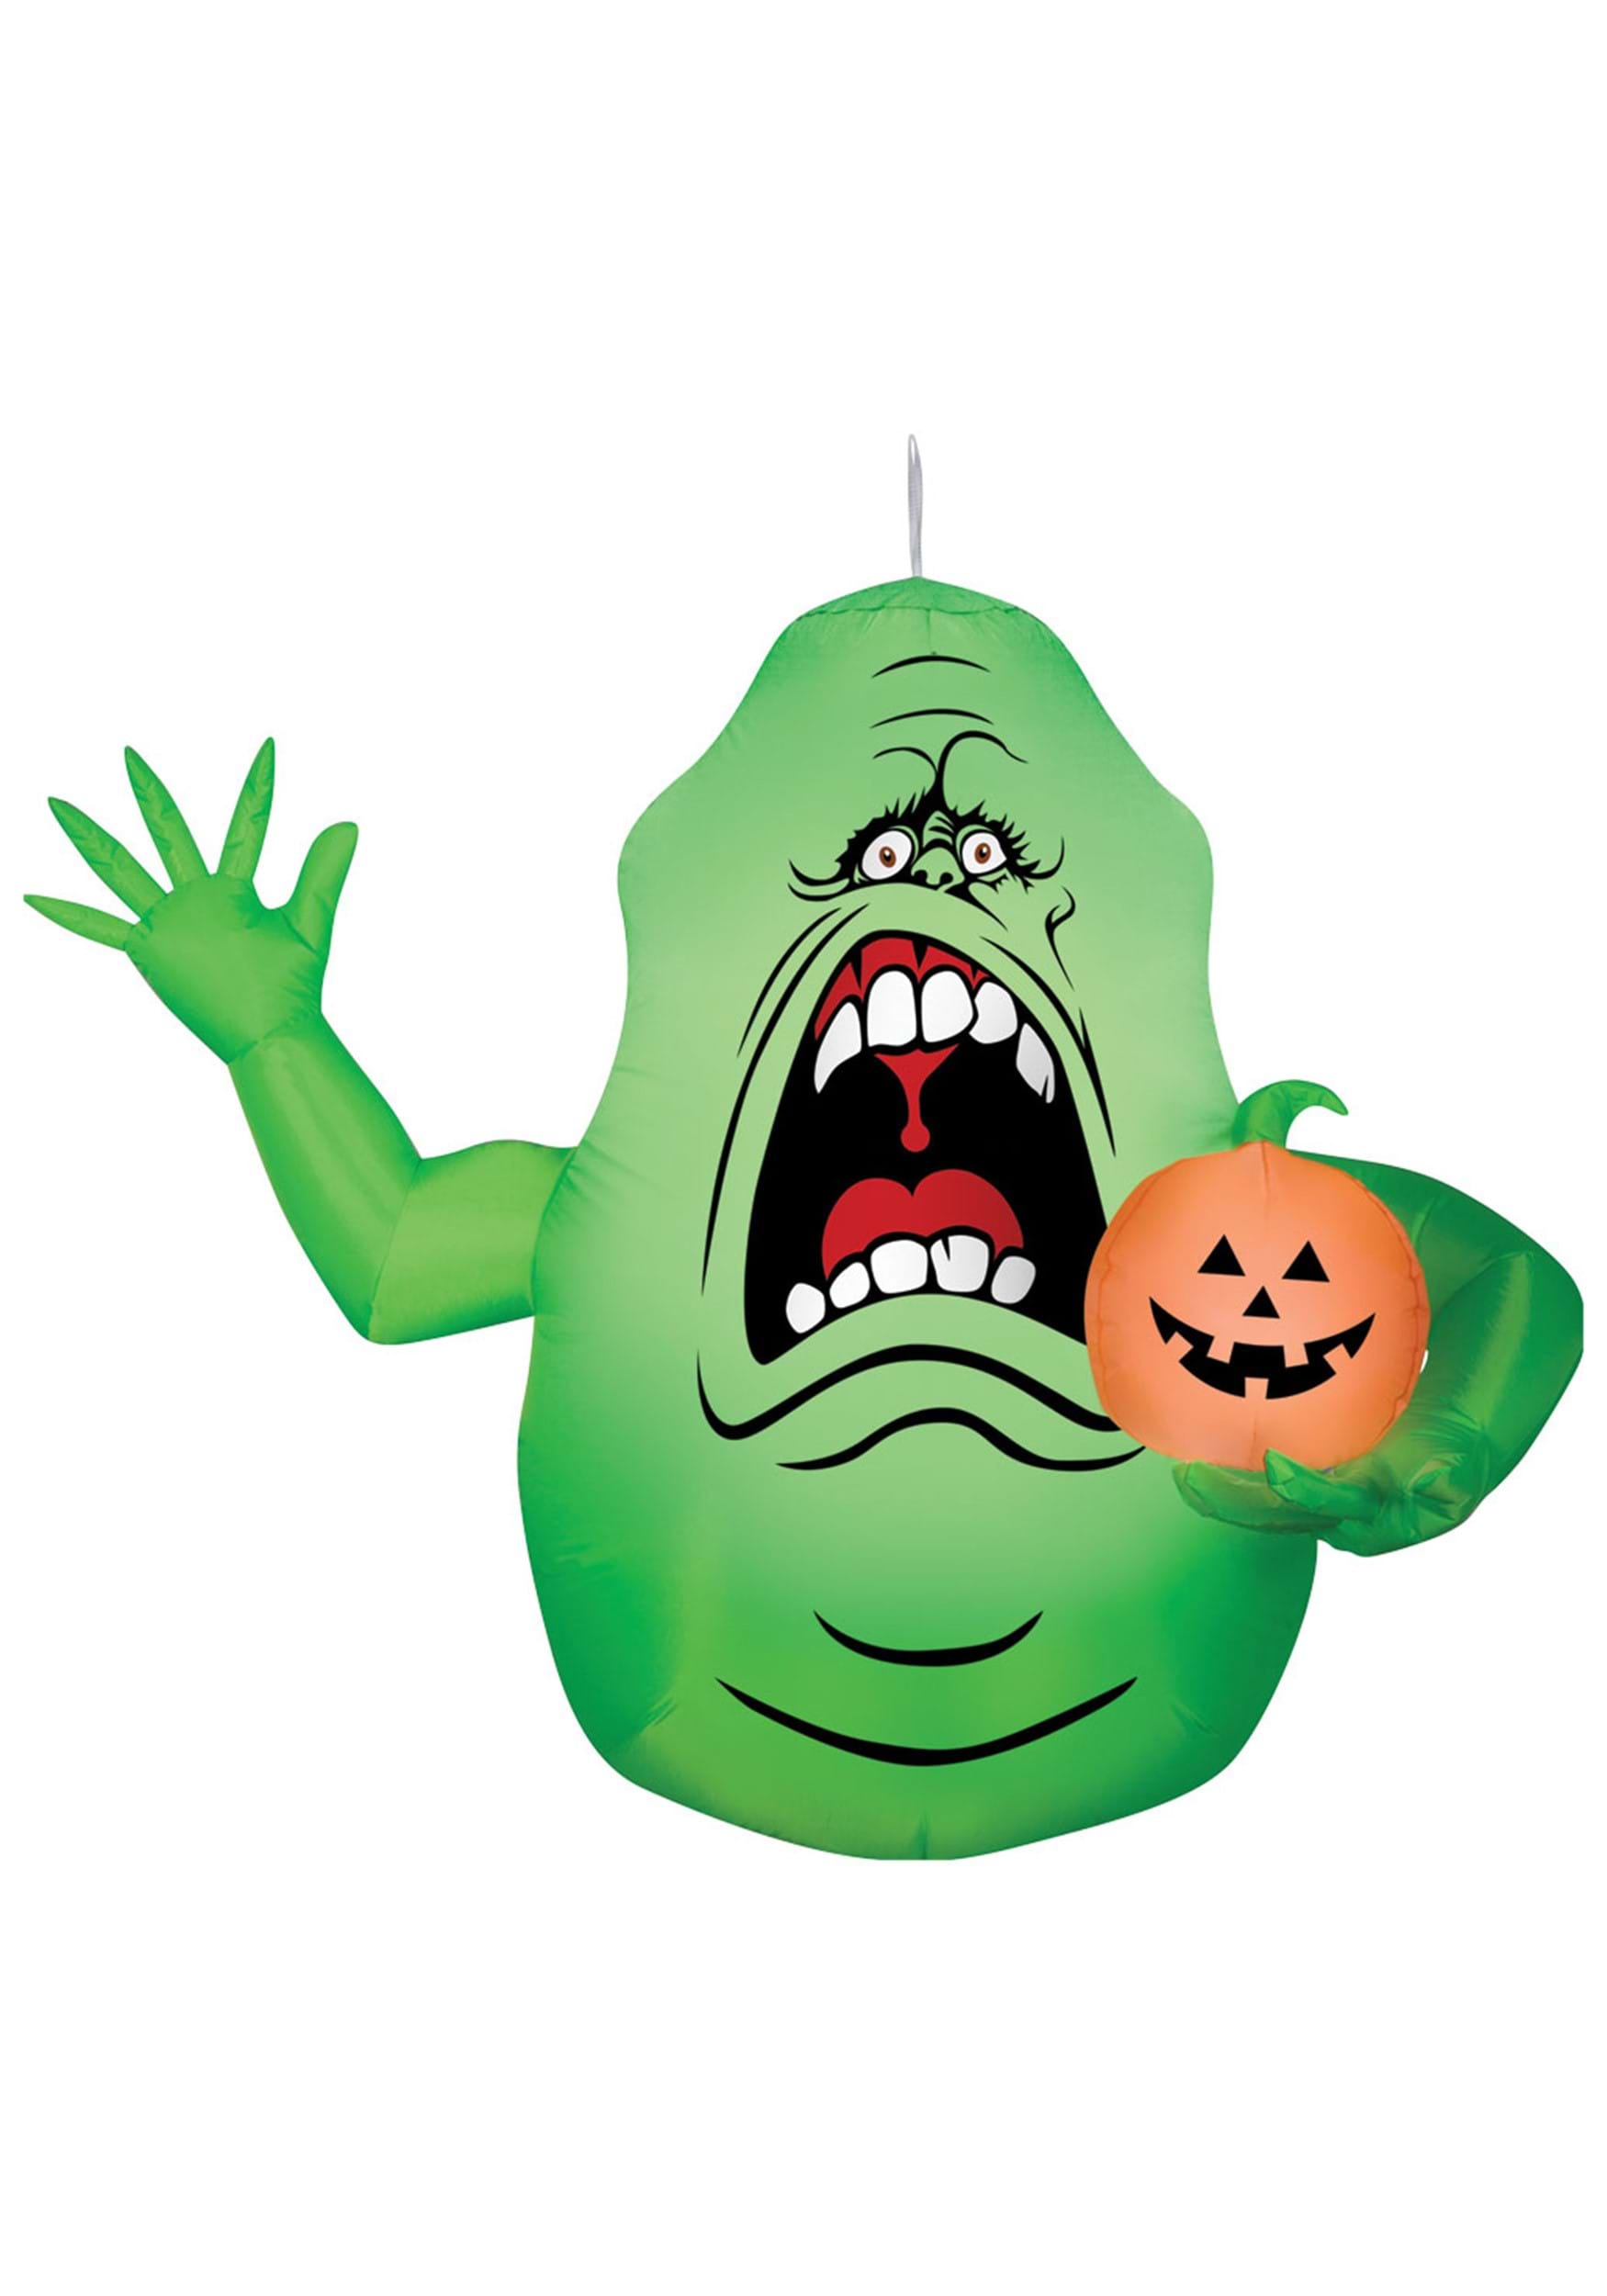 49 Inch Medium Airblown Hanging Slimer Ghost Inflatable